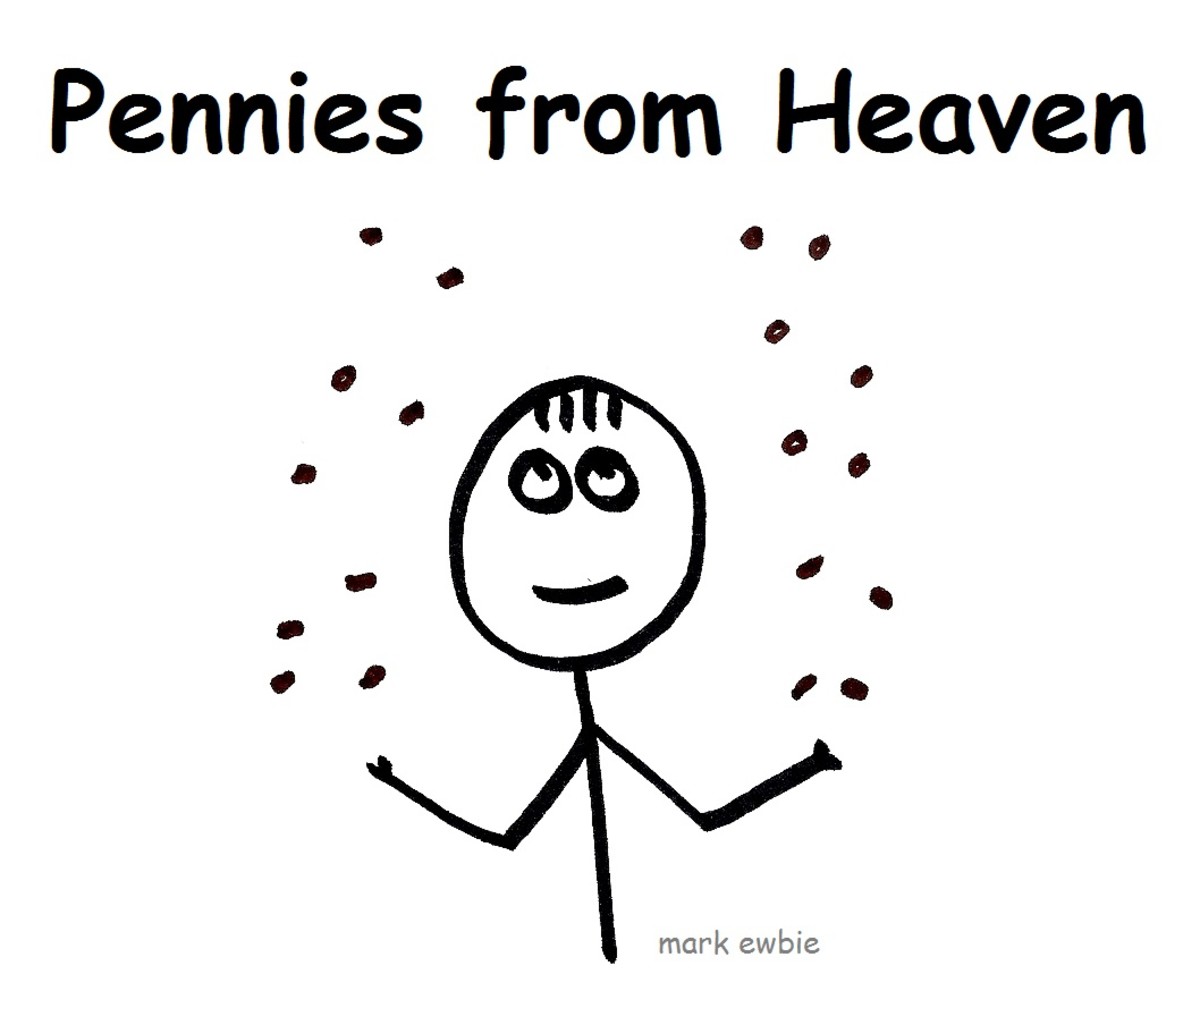 "Pennies from Heaven" - one of many English expressions about money